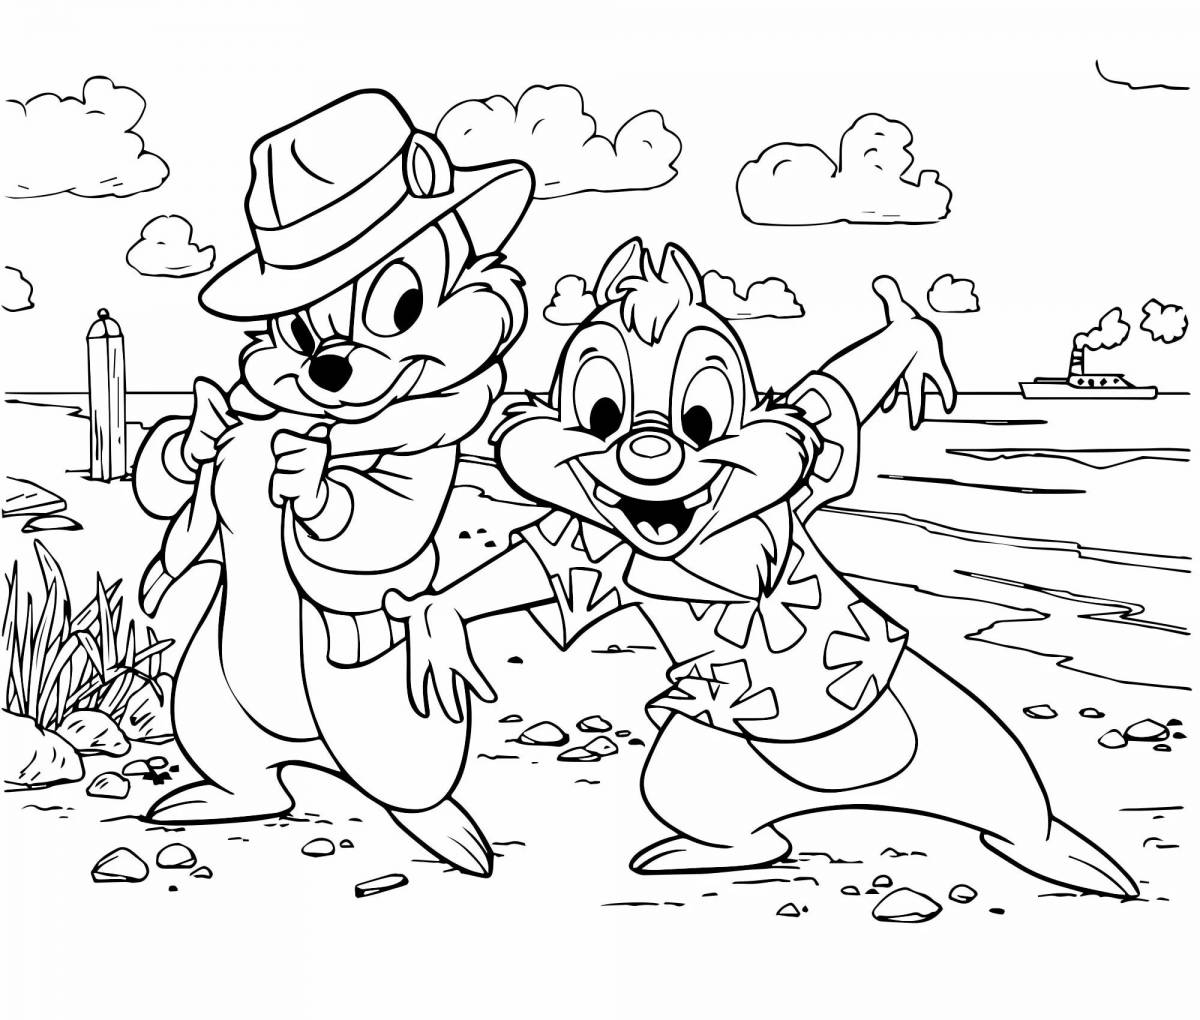 Dale dynamic coloring page